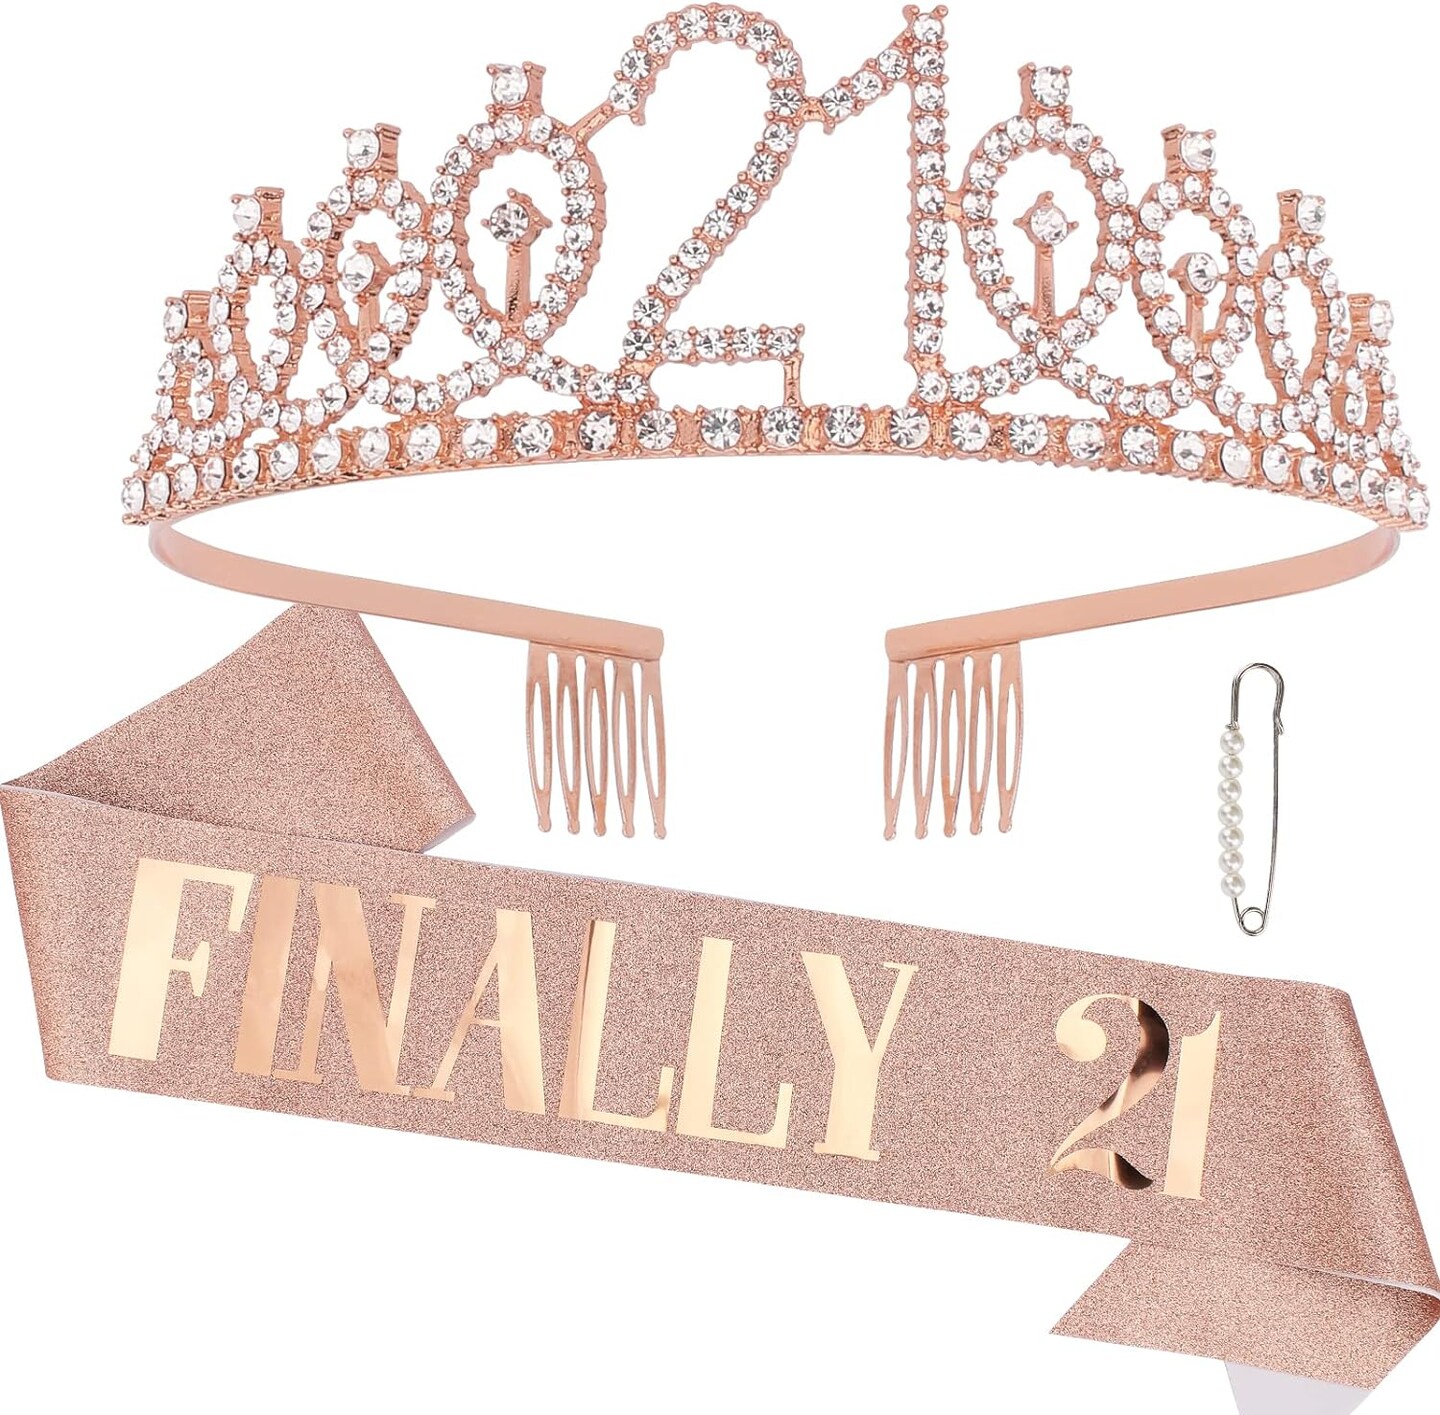 Rose Gold Finally 21 Birthday Sash and Crown for Women 21st Birthday Tiaras and Sash Set for Women Birthday Decorations Rose Gold Birthday Queen Crowns Tiaras for Women